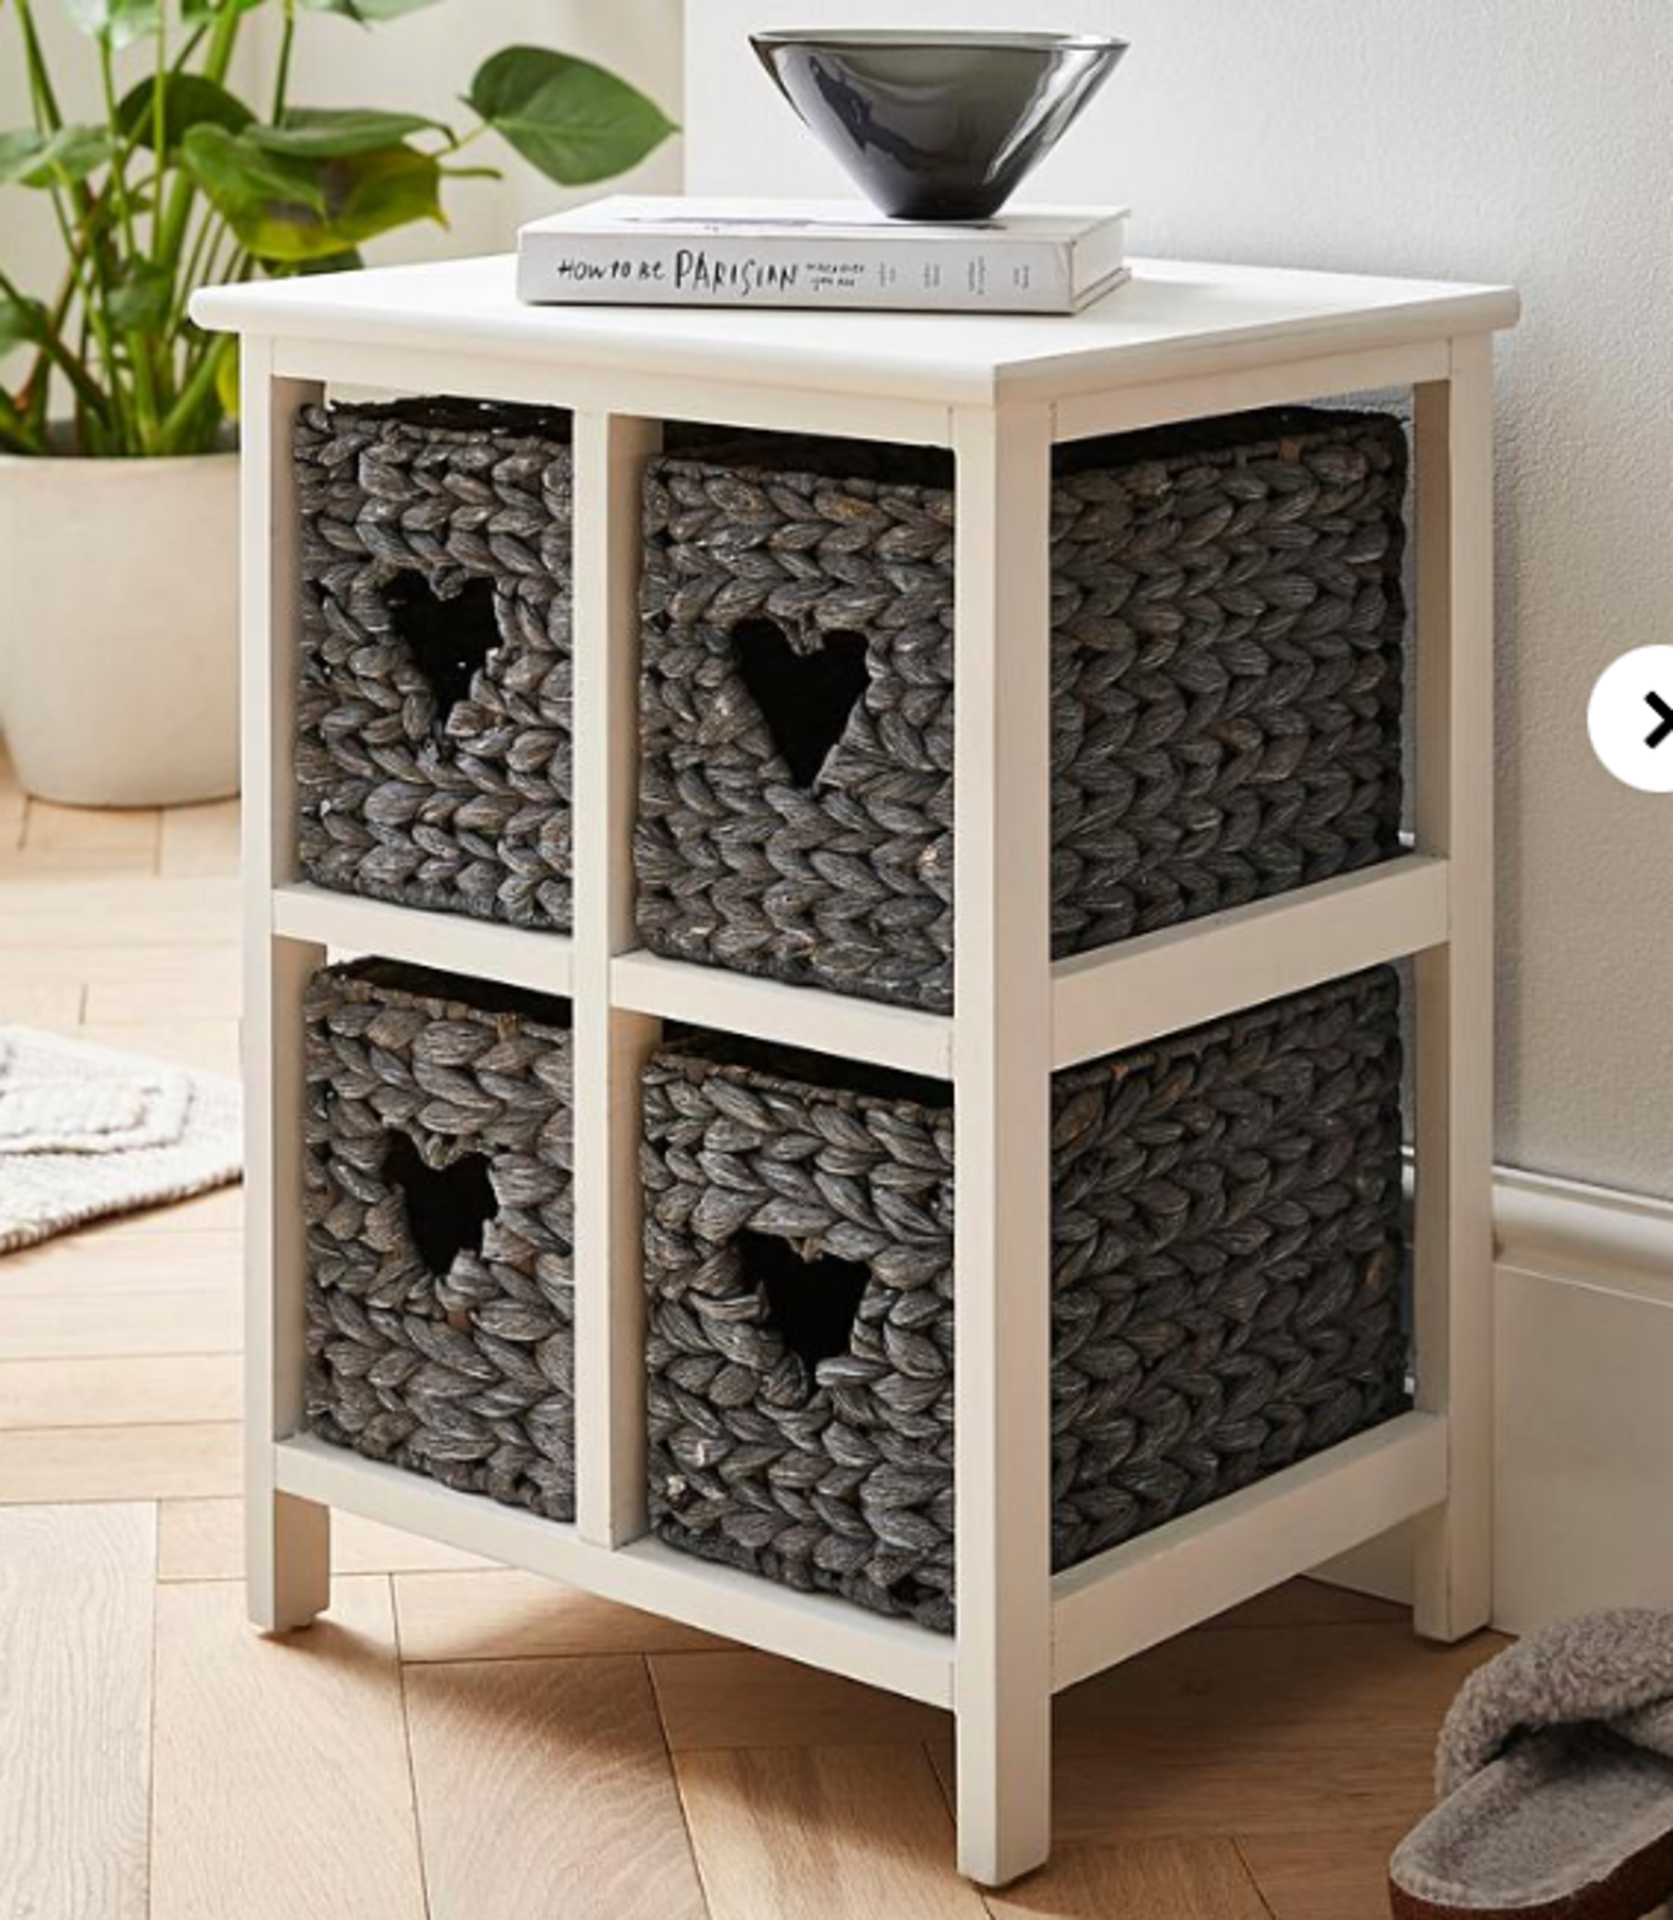 Hyacinth Hearts 4 Drawer Square Unit. - ER28. RRP £155.00. Declutter your home with our stylish